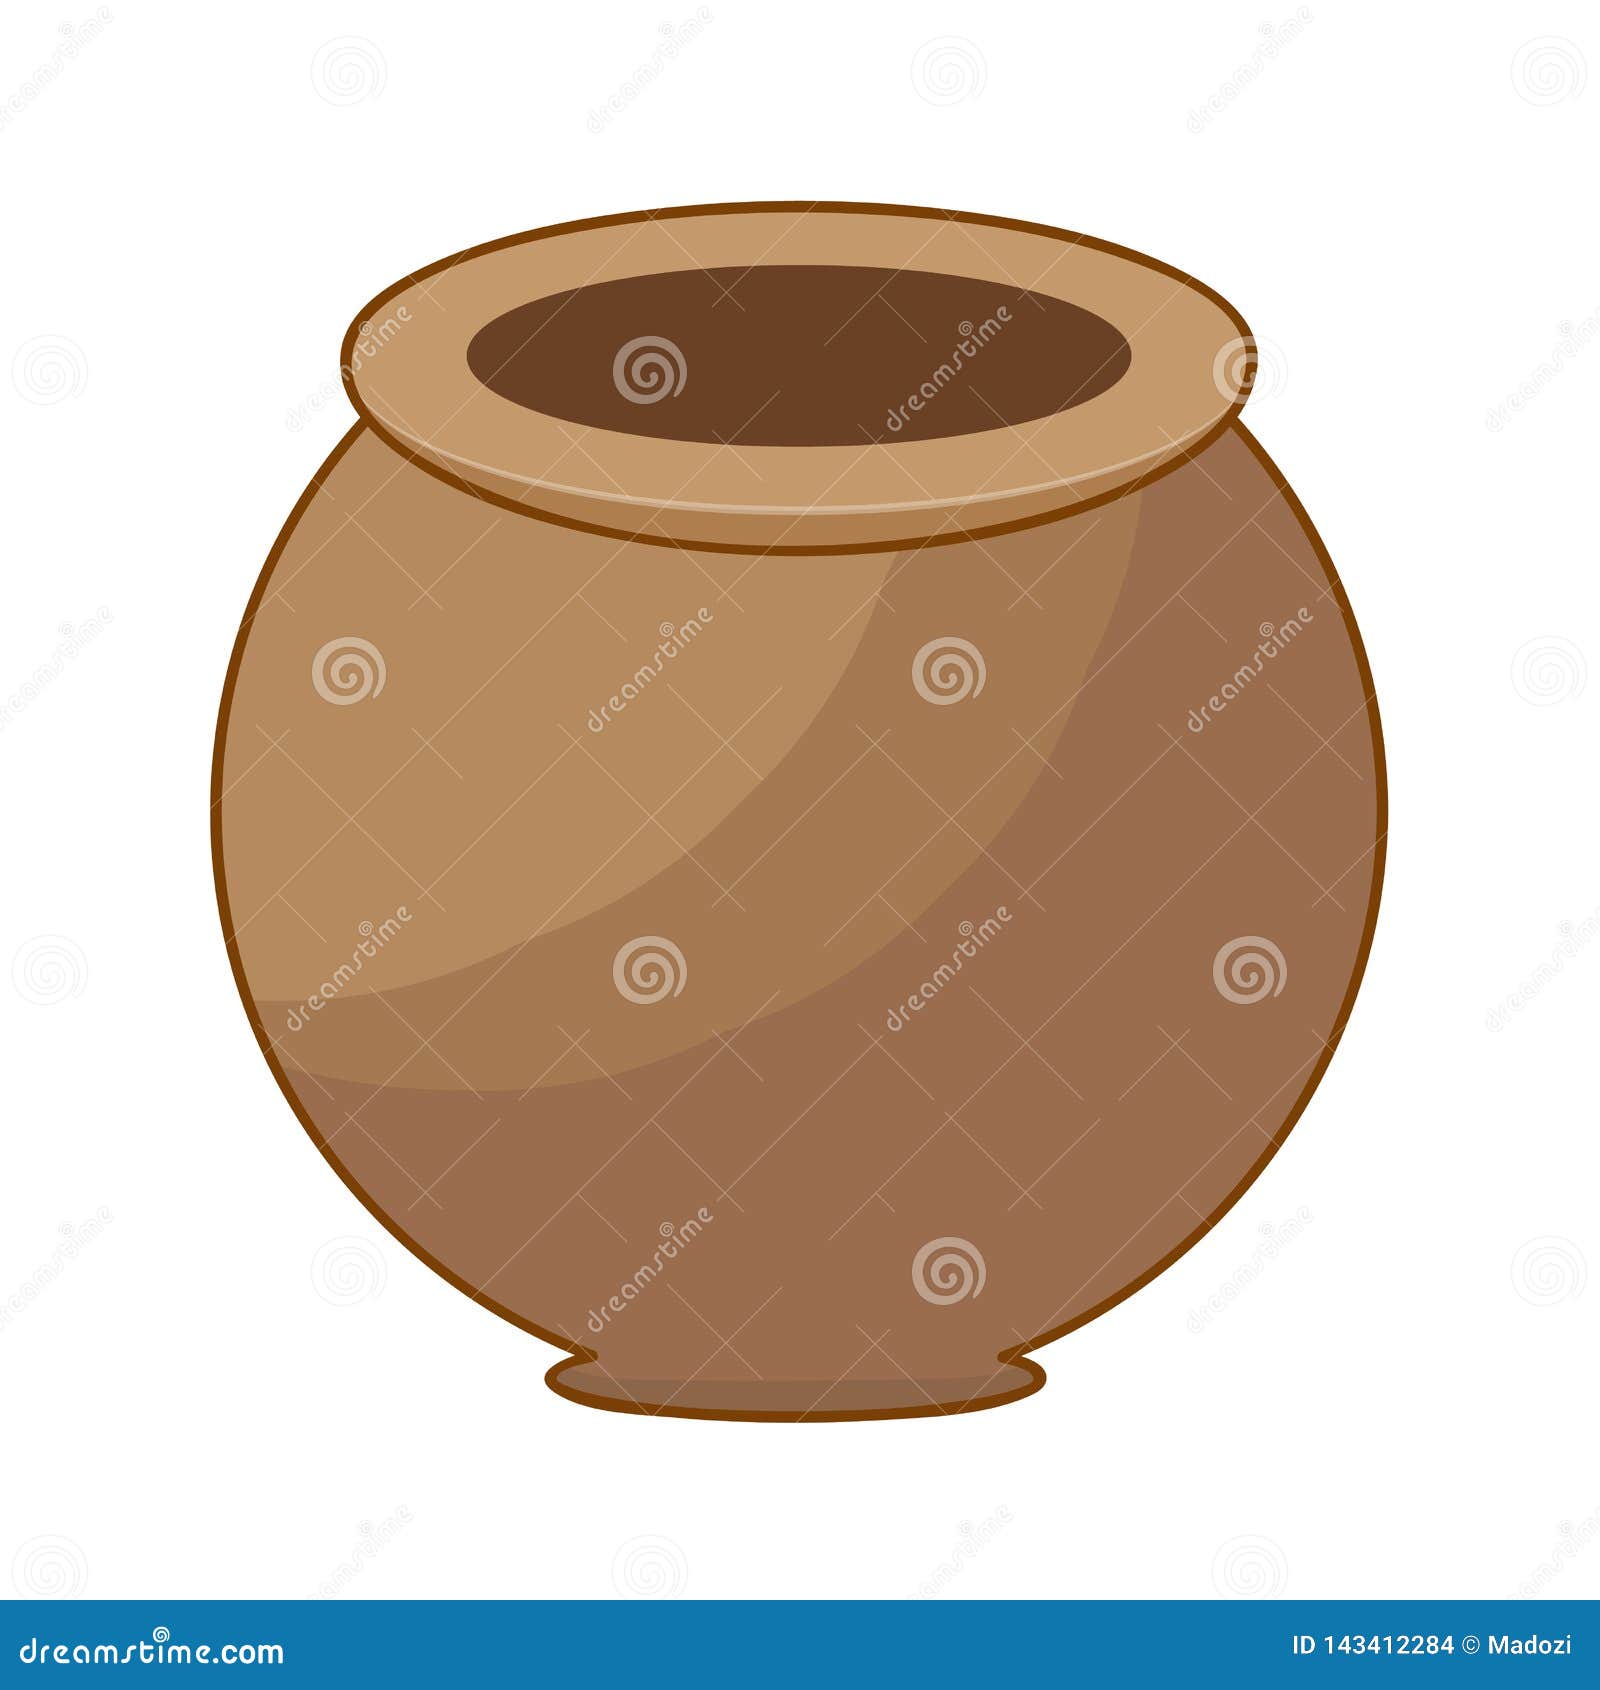 Clay pot stock vector. Illustration of history, earthenware - 143412284